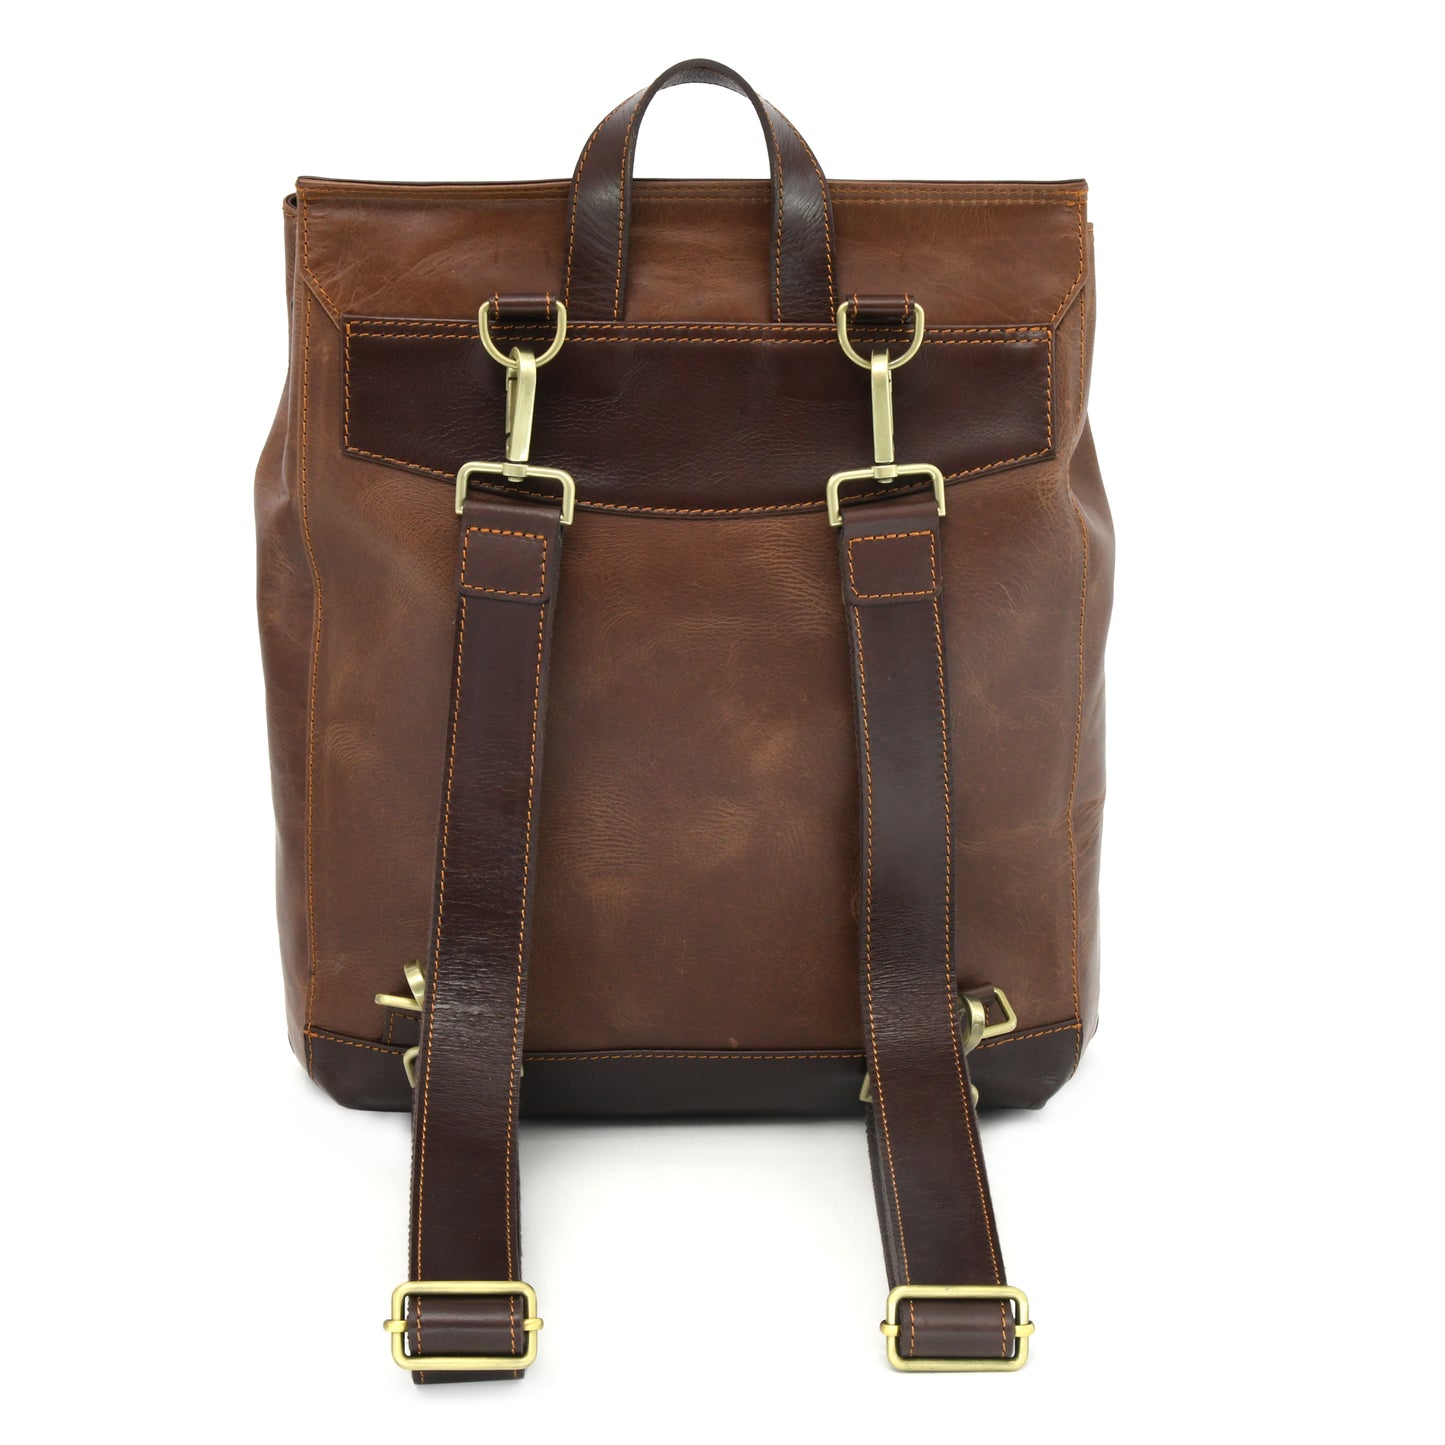 Style n Craft 392153 Backpack in Light & Dark Brown Combination Full Grain Leather - Back view showing the main bag in light brown crunch effect & the top handle, bottom of the bag  & the detachable & adjustable shoulder straps in dark brown